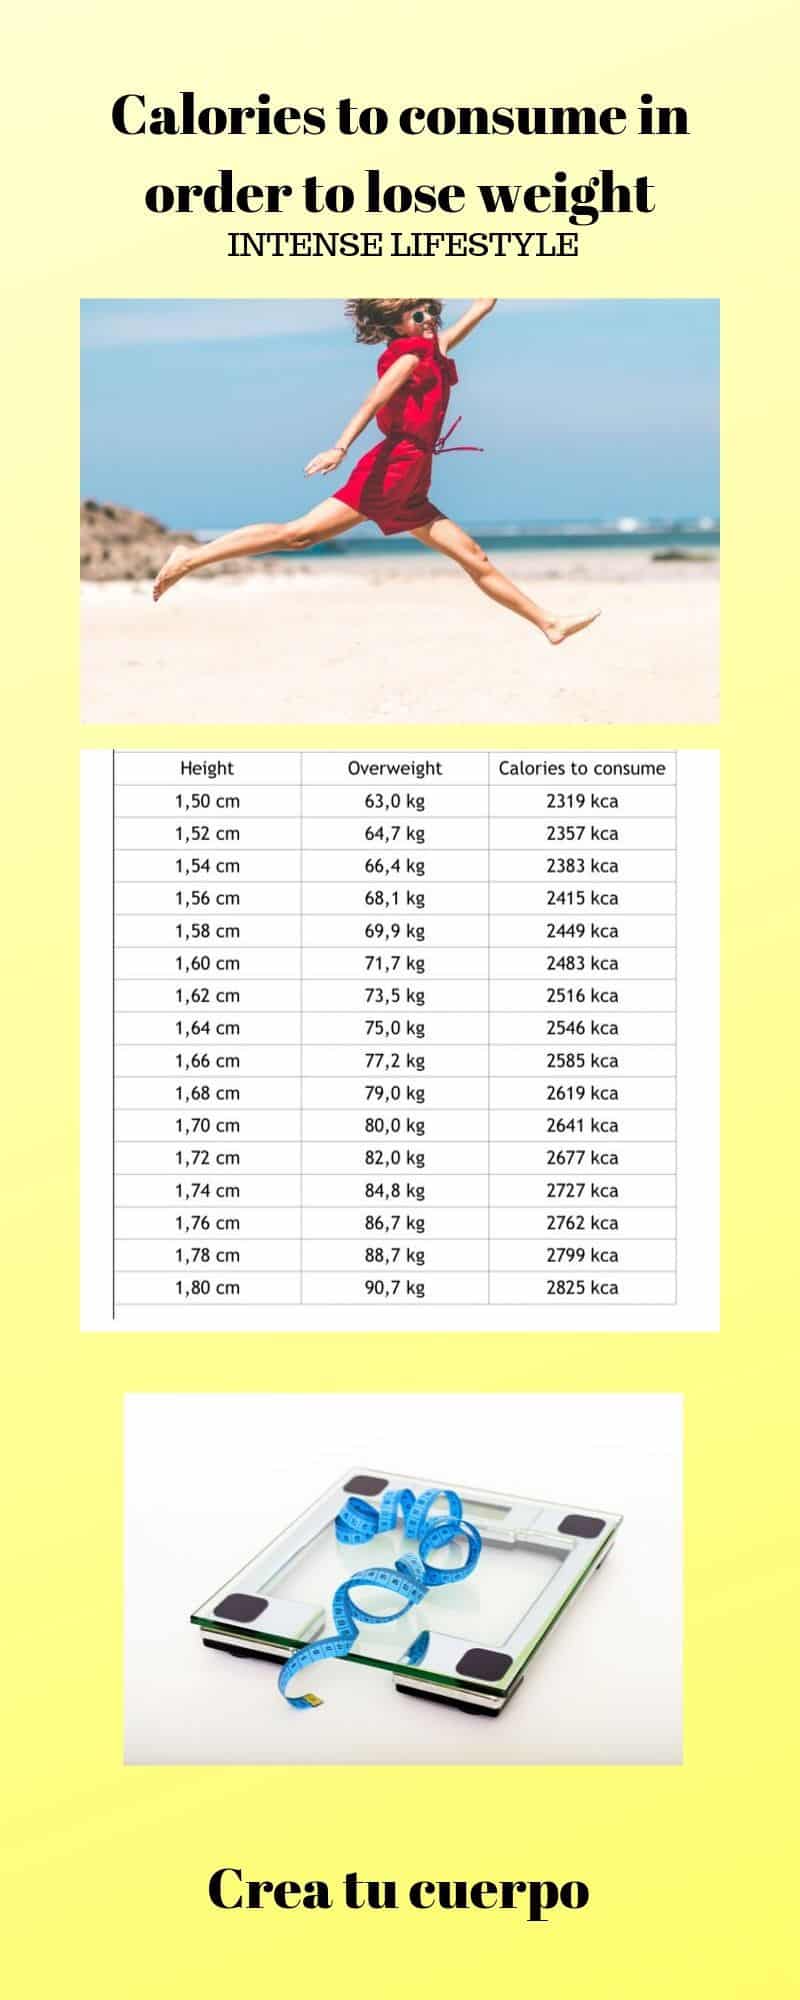 calories to lose in order to lose Weight if you have an intense lifestyle